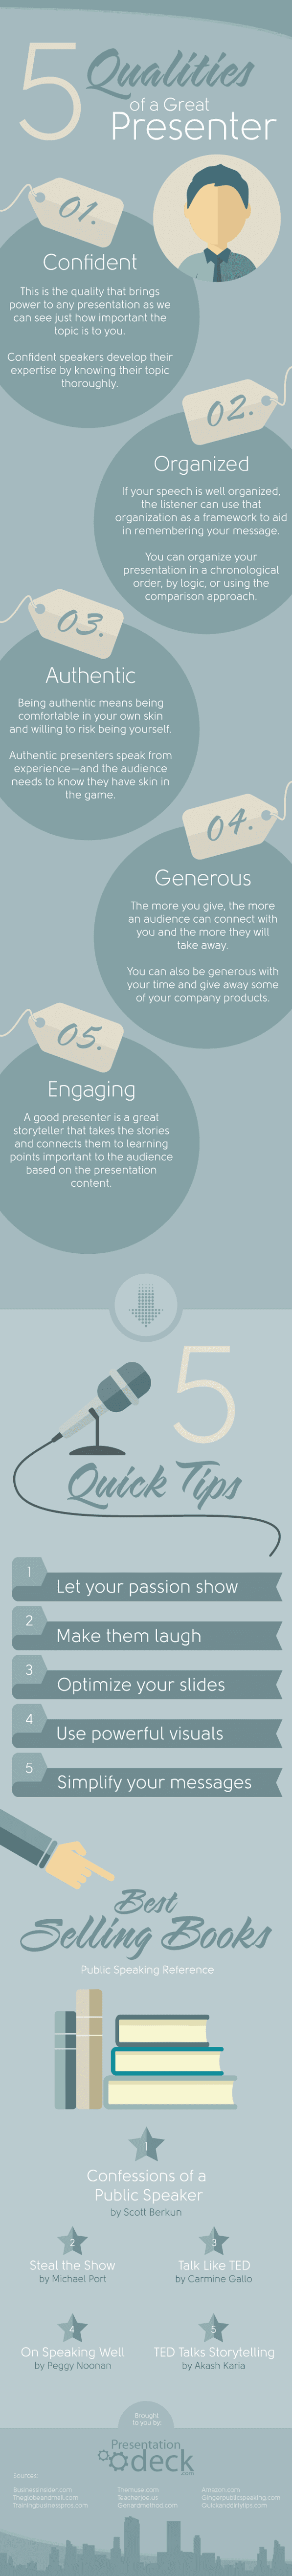 5 Qualities of a Great Presenter #infographic